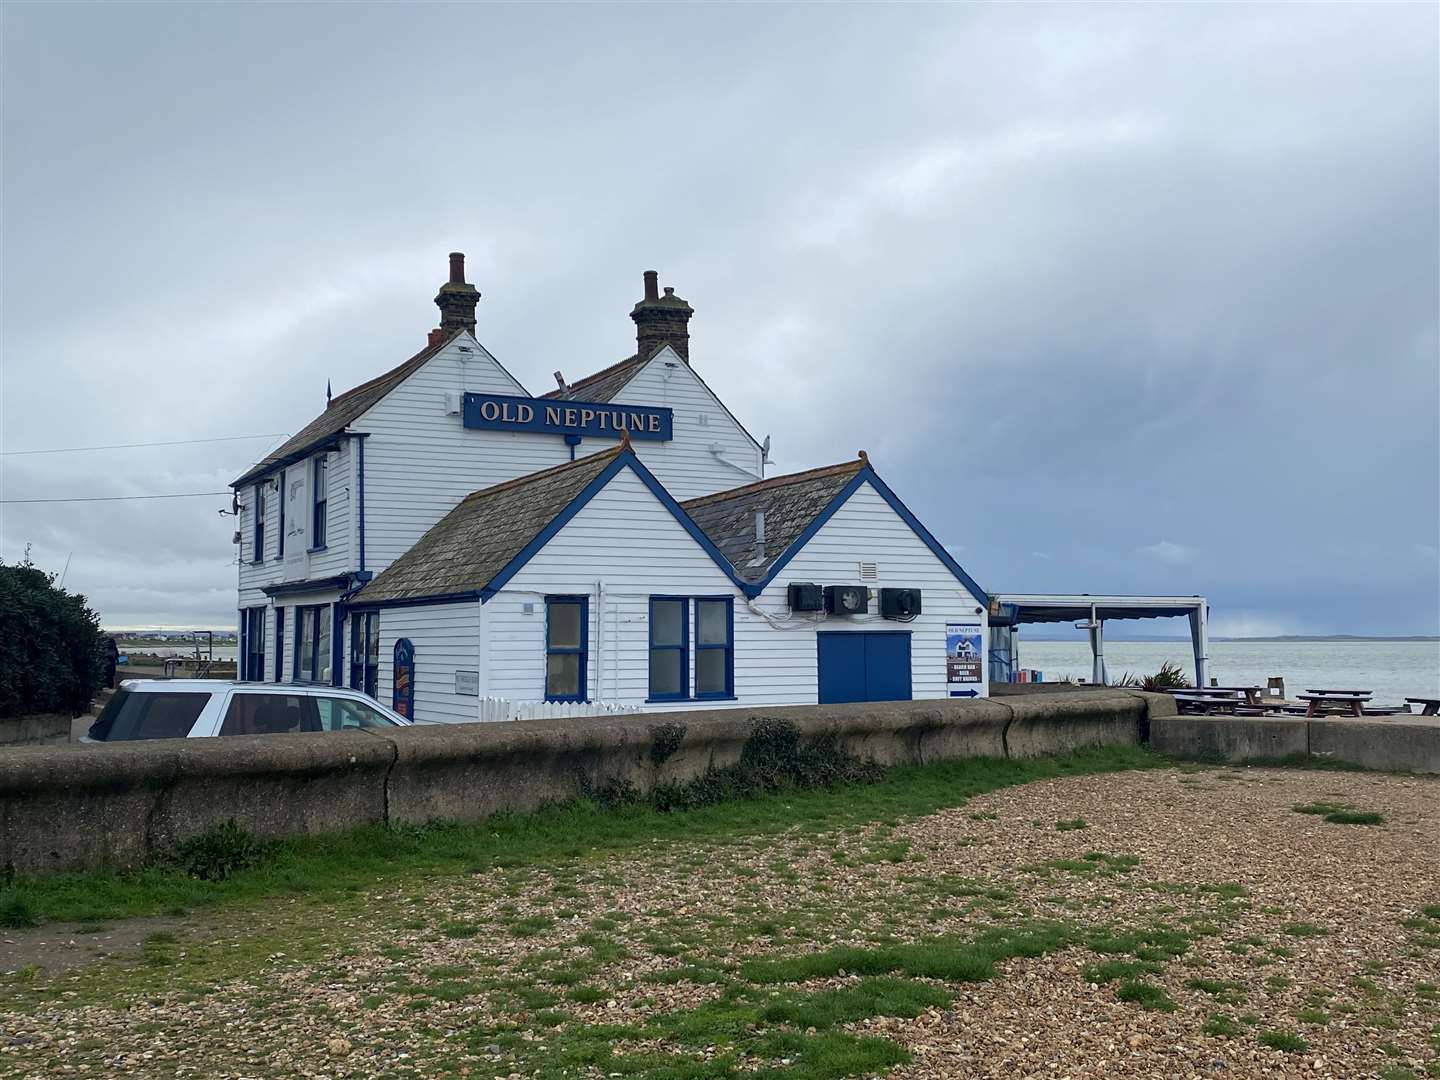 The Old Neptune is an iconic landmark in Whitstable